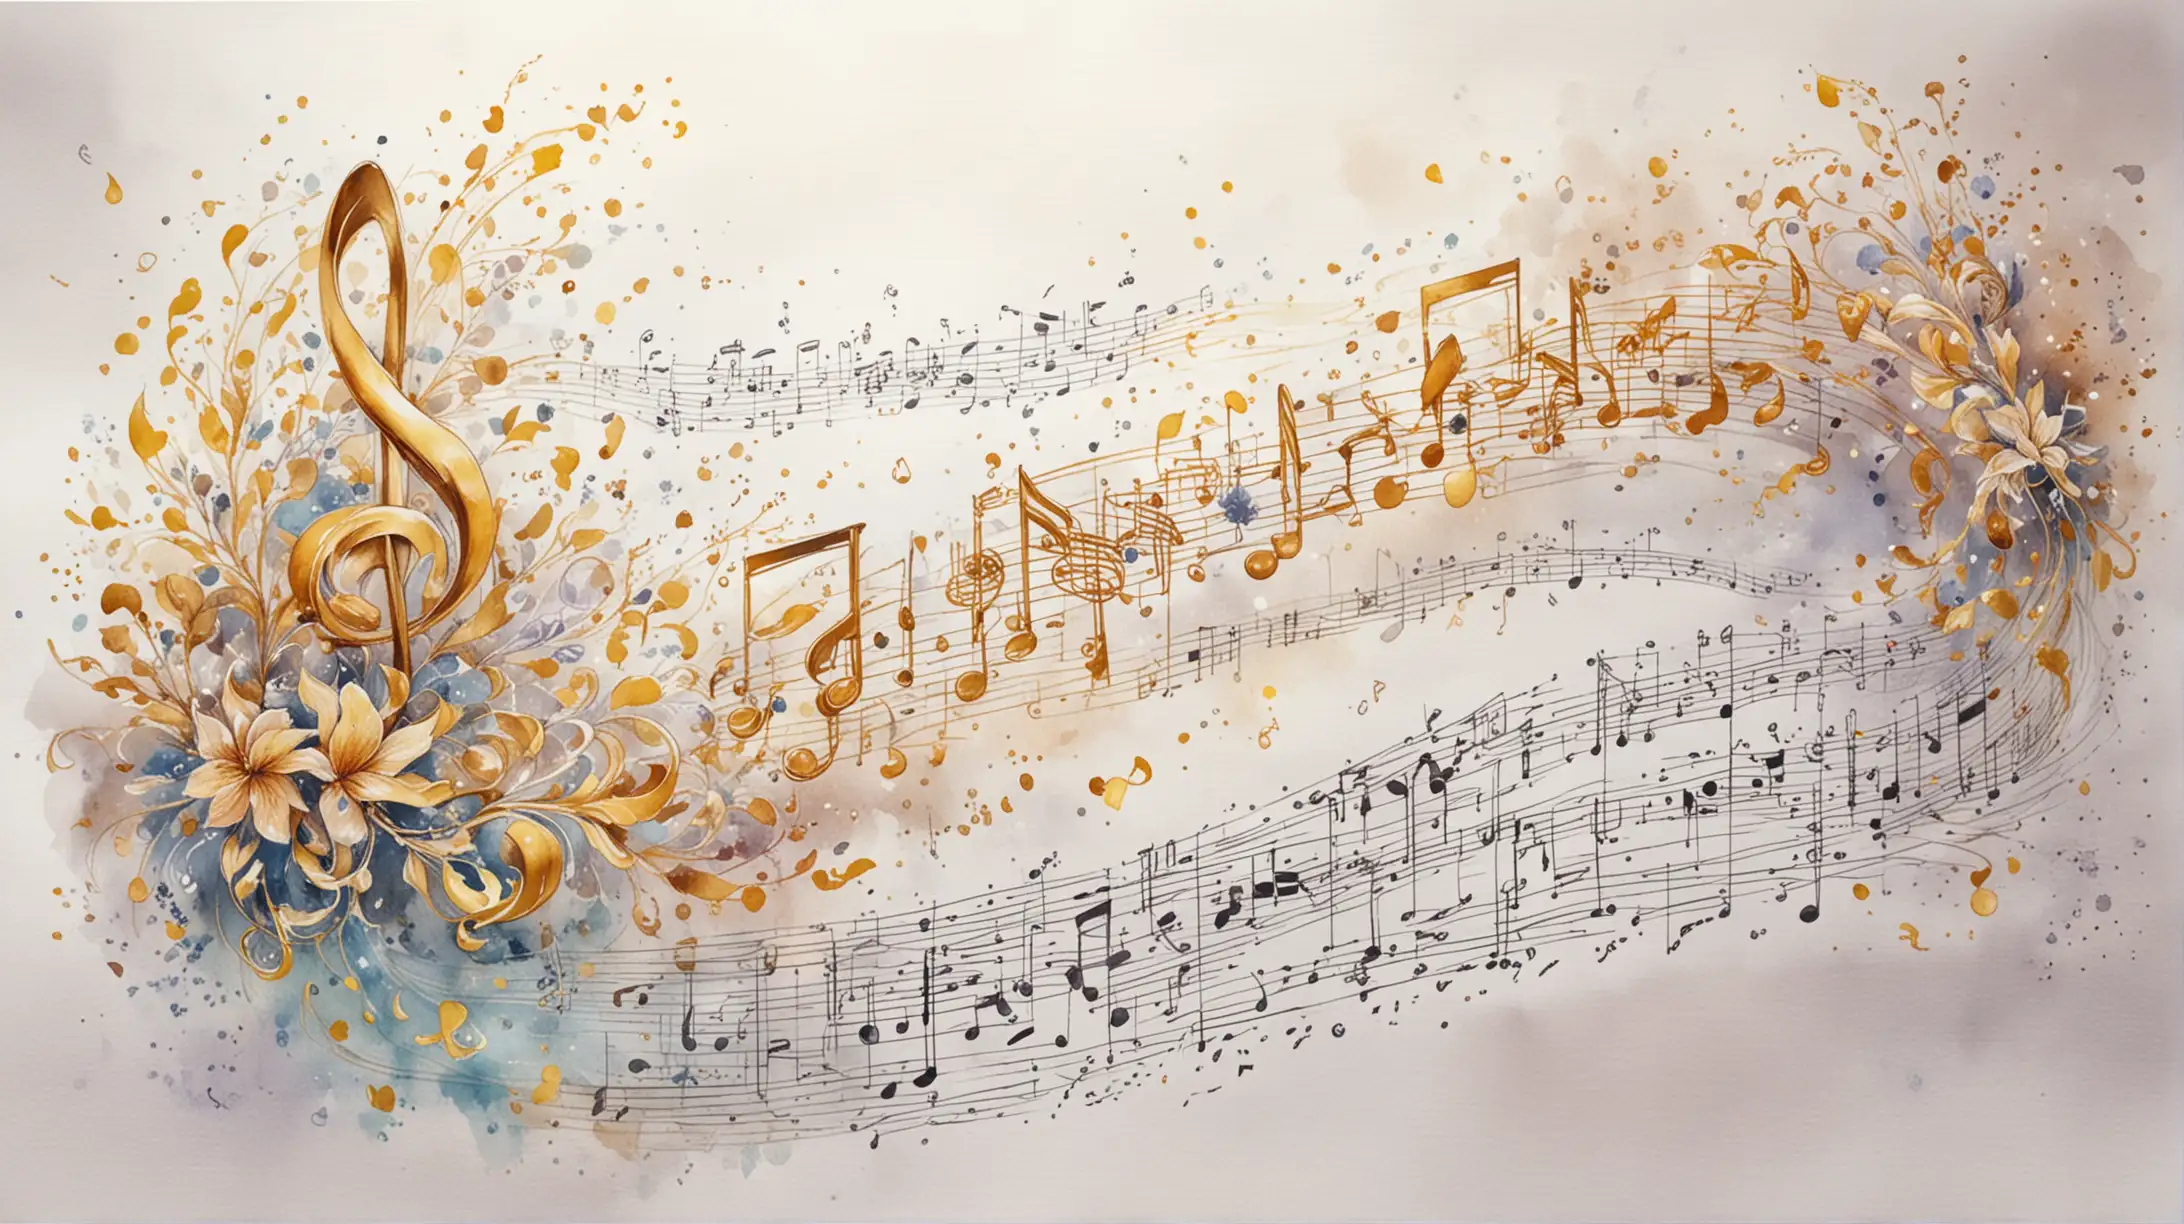 on a white background, painted in watercolor in anime style, curly sheet music with flying golden notes, spring waltz, inspiration, flight, fantasy